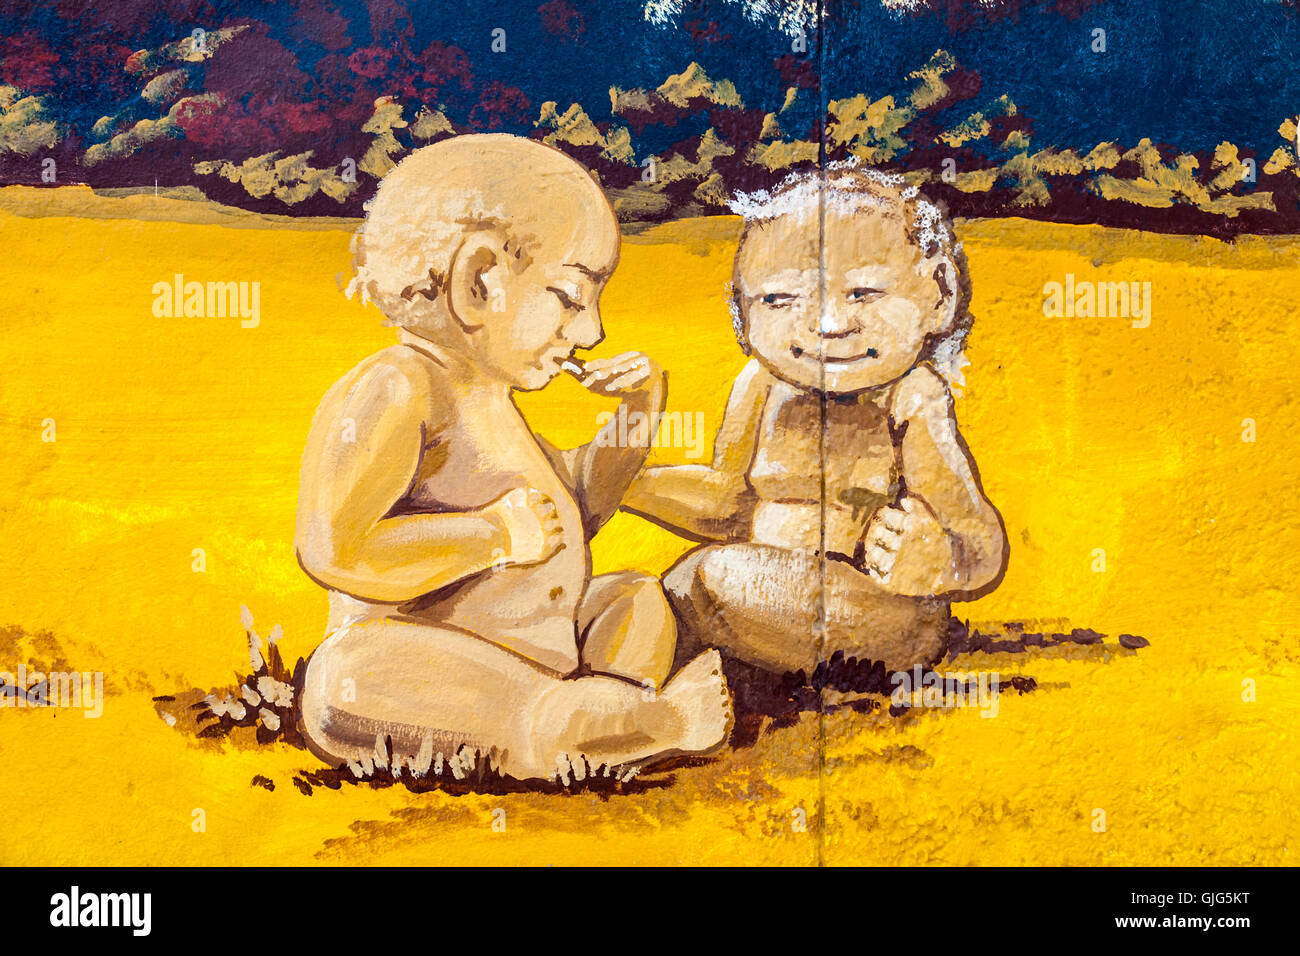 Detail of graffiti mural on the Berlin wall showing two aged babies, East Side Gallery, Friedrichshain, Berlin, Germany. Stock Photo